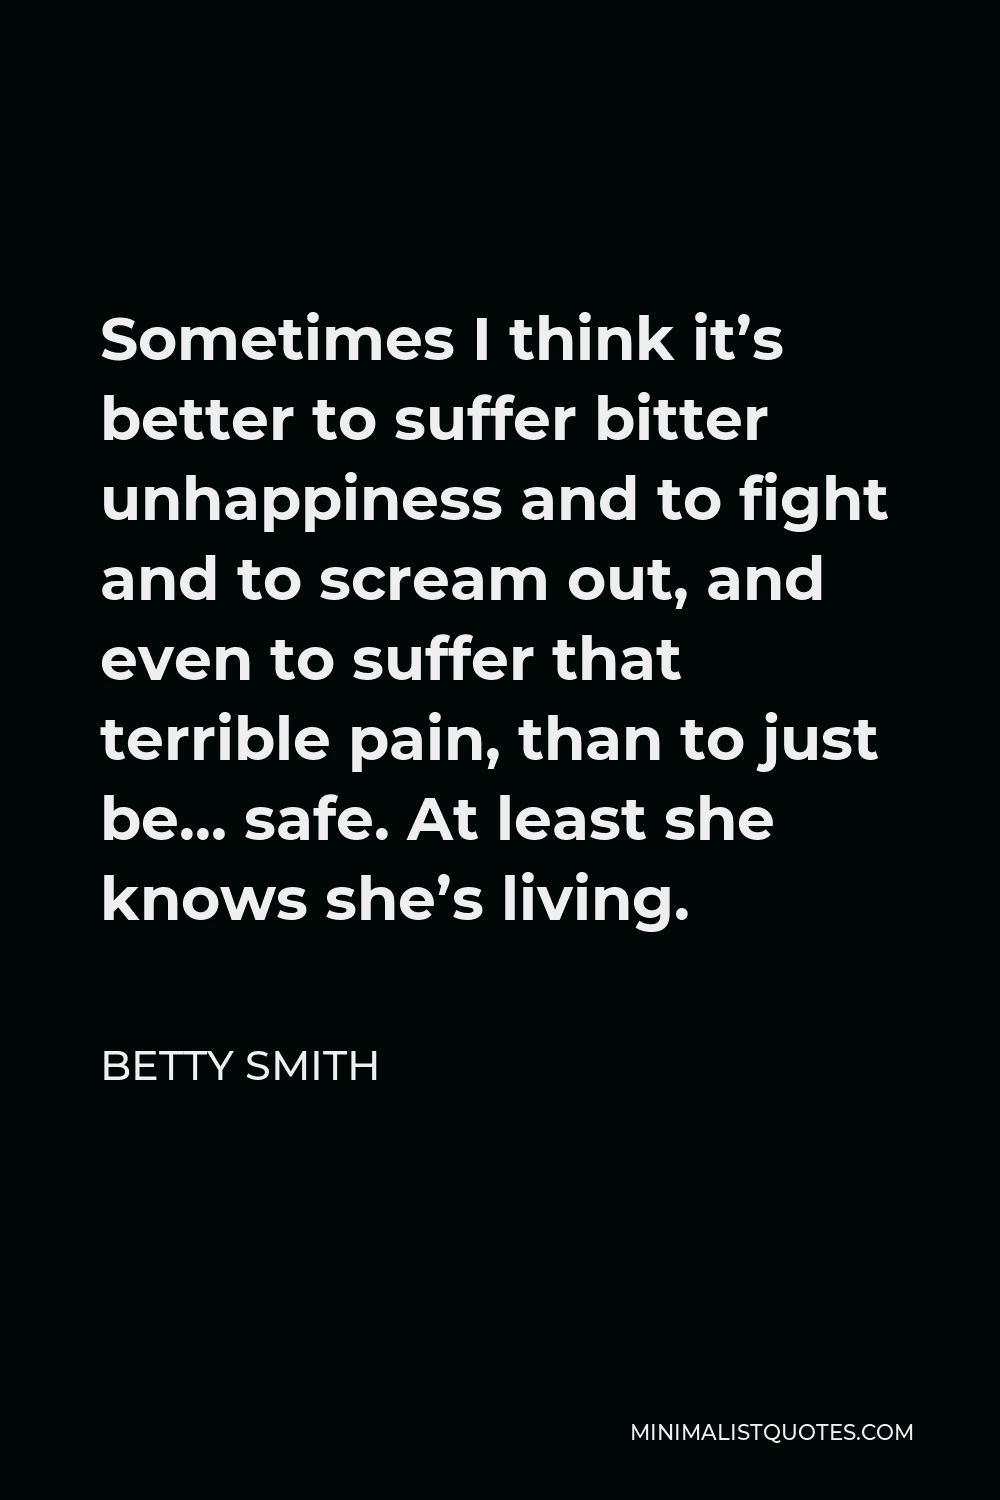 Betty Smith Quote - Sometimes I think it’s better to suffer bitter unhappiness and to fight and to scream out, and even to suffer that terrible pain, than to just be… safe. At least she knows she’s living.